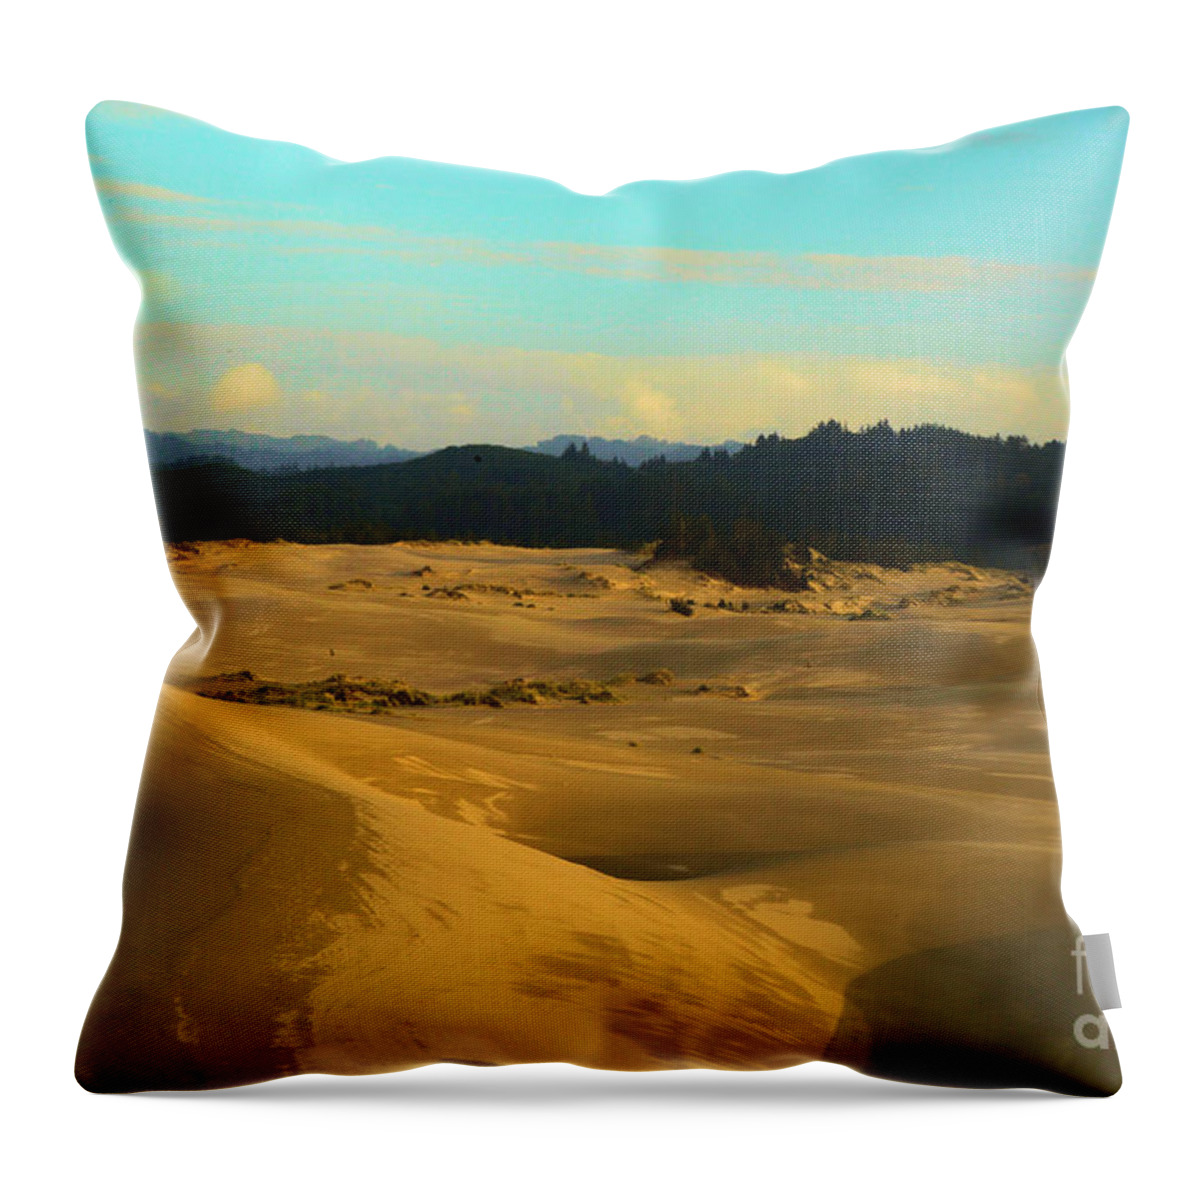 Oregon Dunes Throw Pillow featuring the photograph Afternoon At Oregon Dunes by Adam Jewell